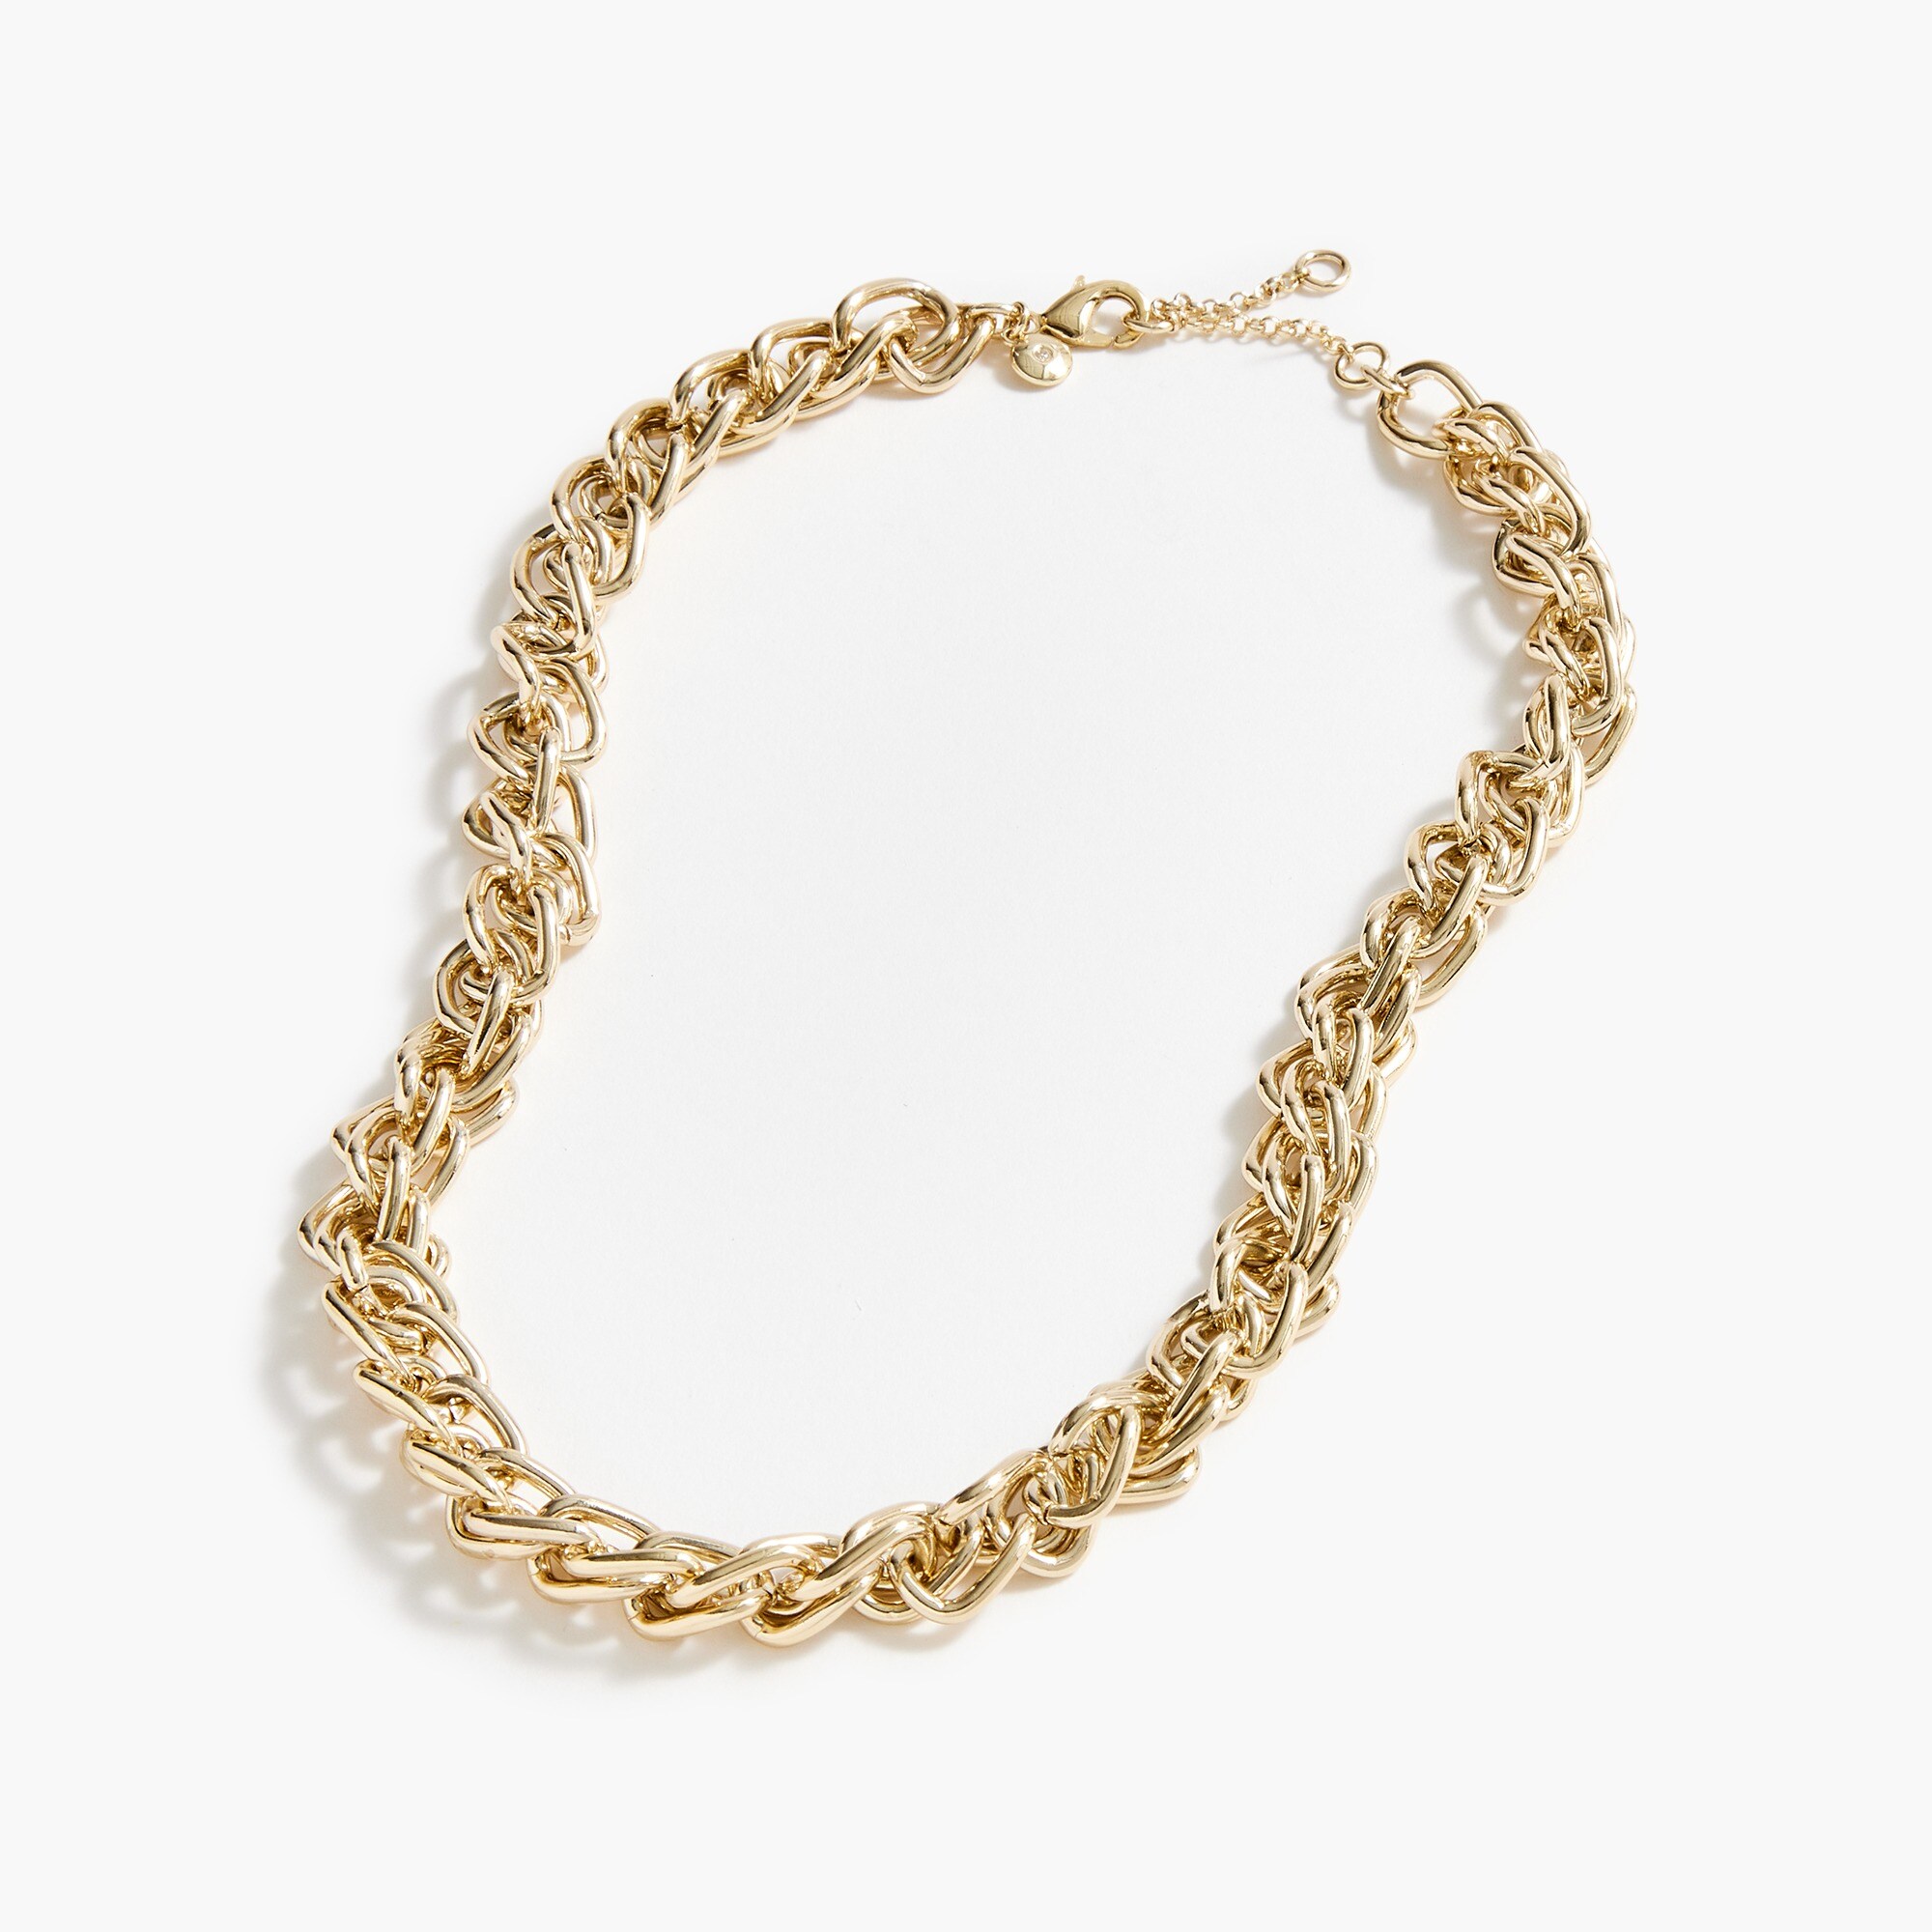  Chunky chain necklace